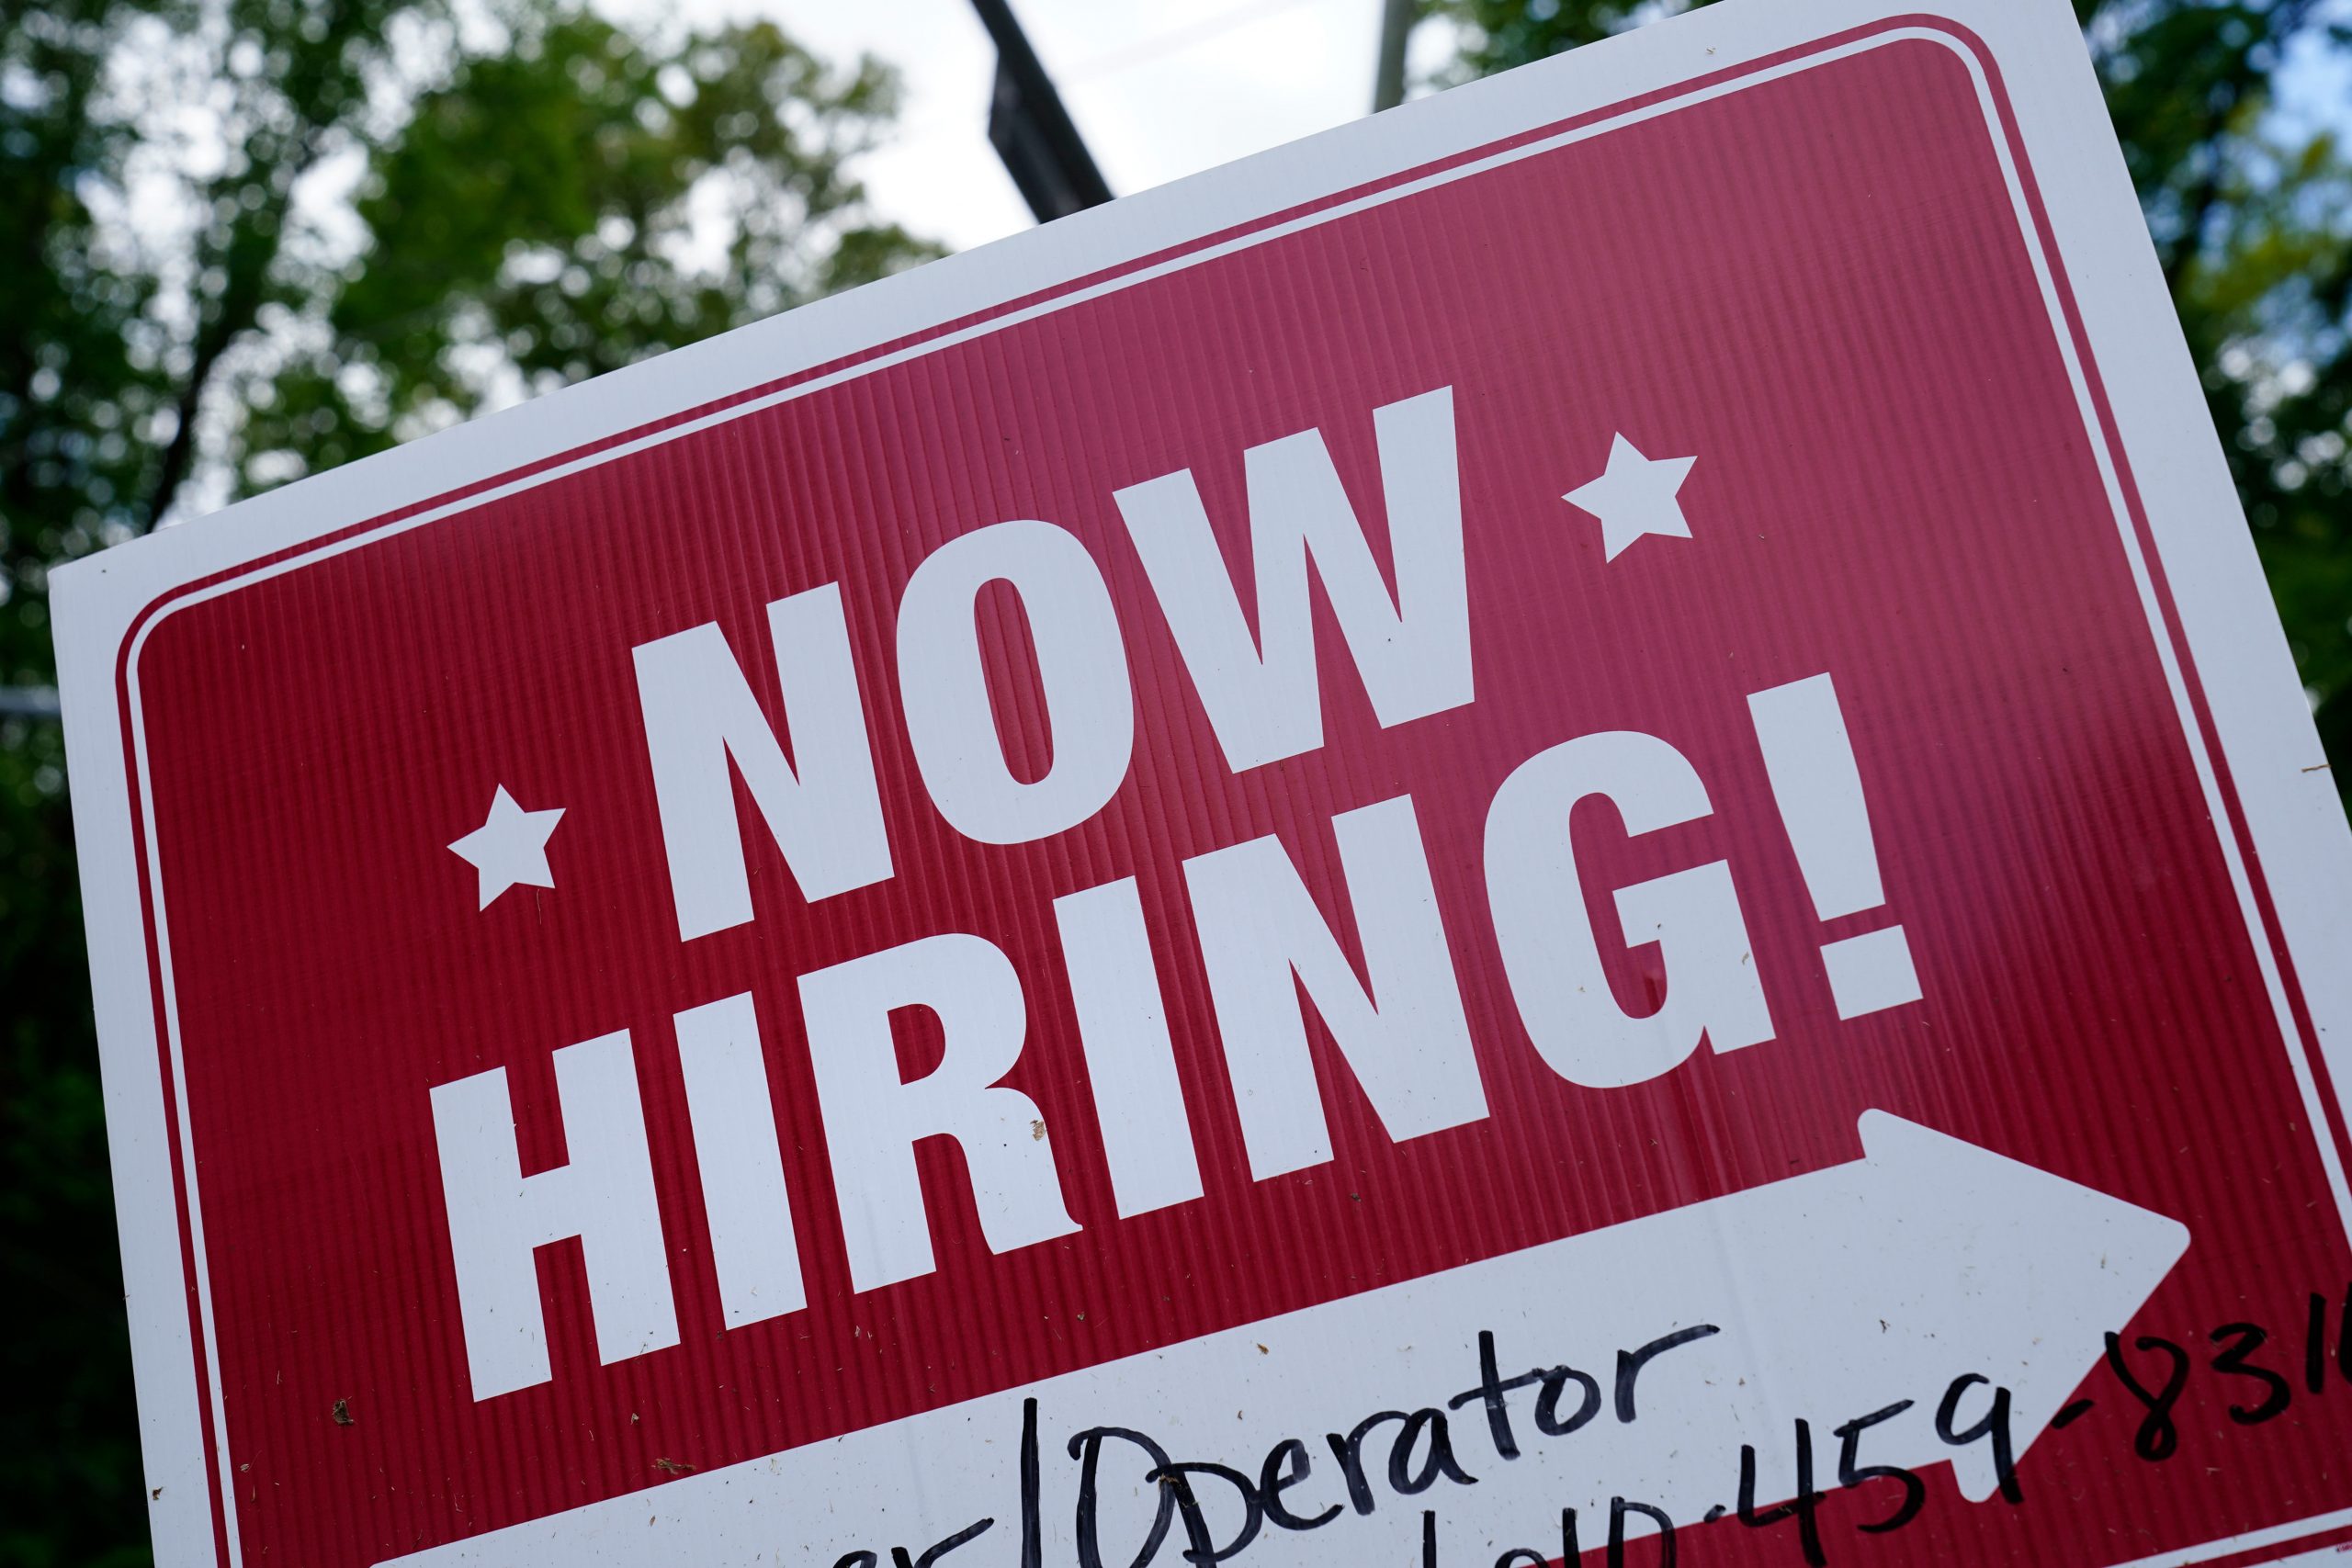 US added 431,000 jobs in March, reducing unemployment rate to 3.6%